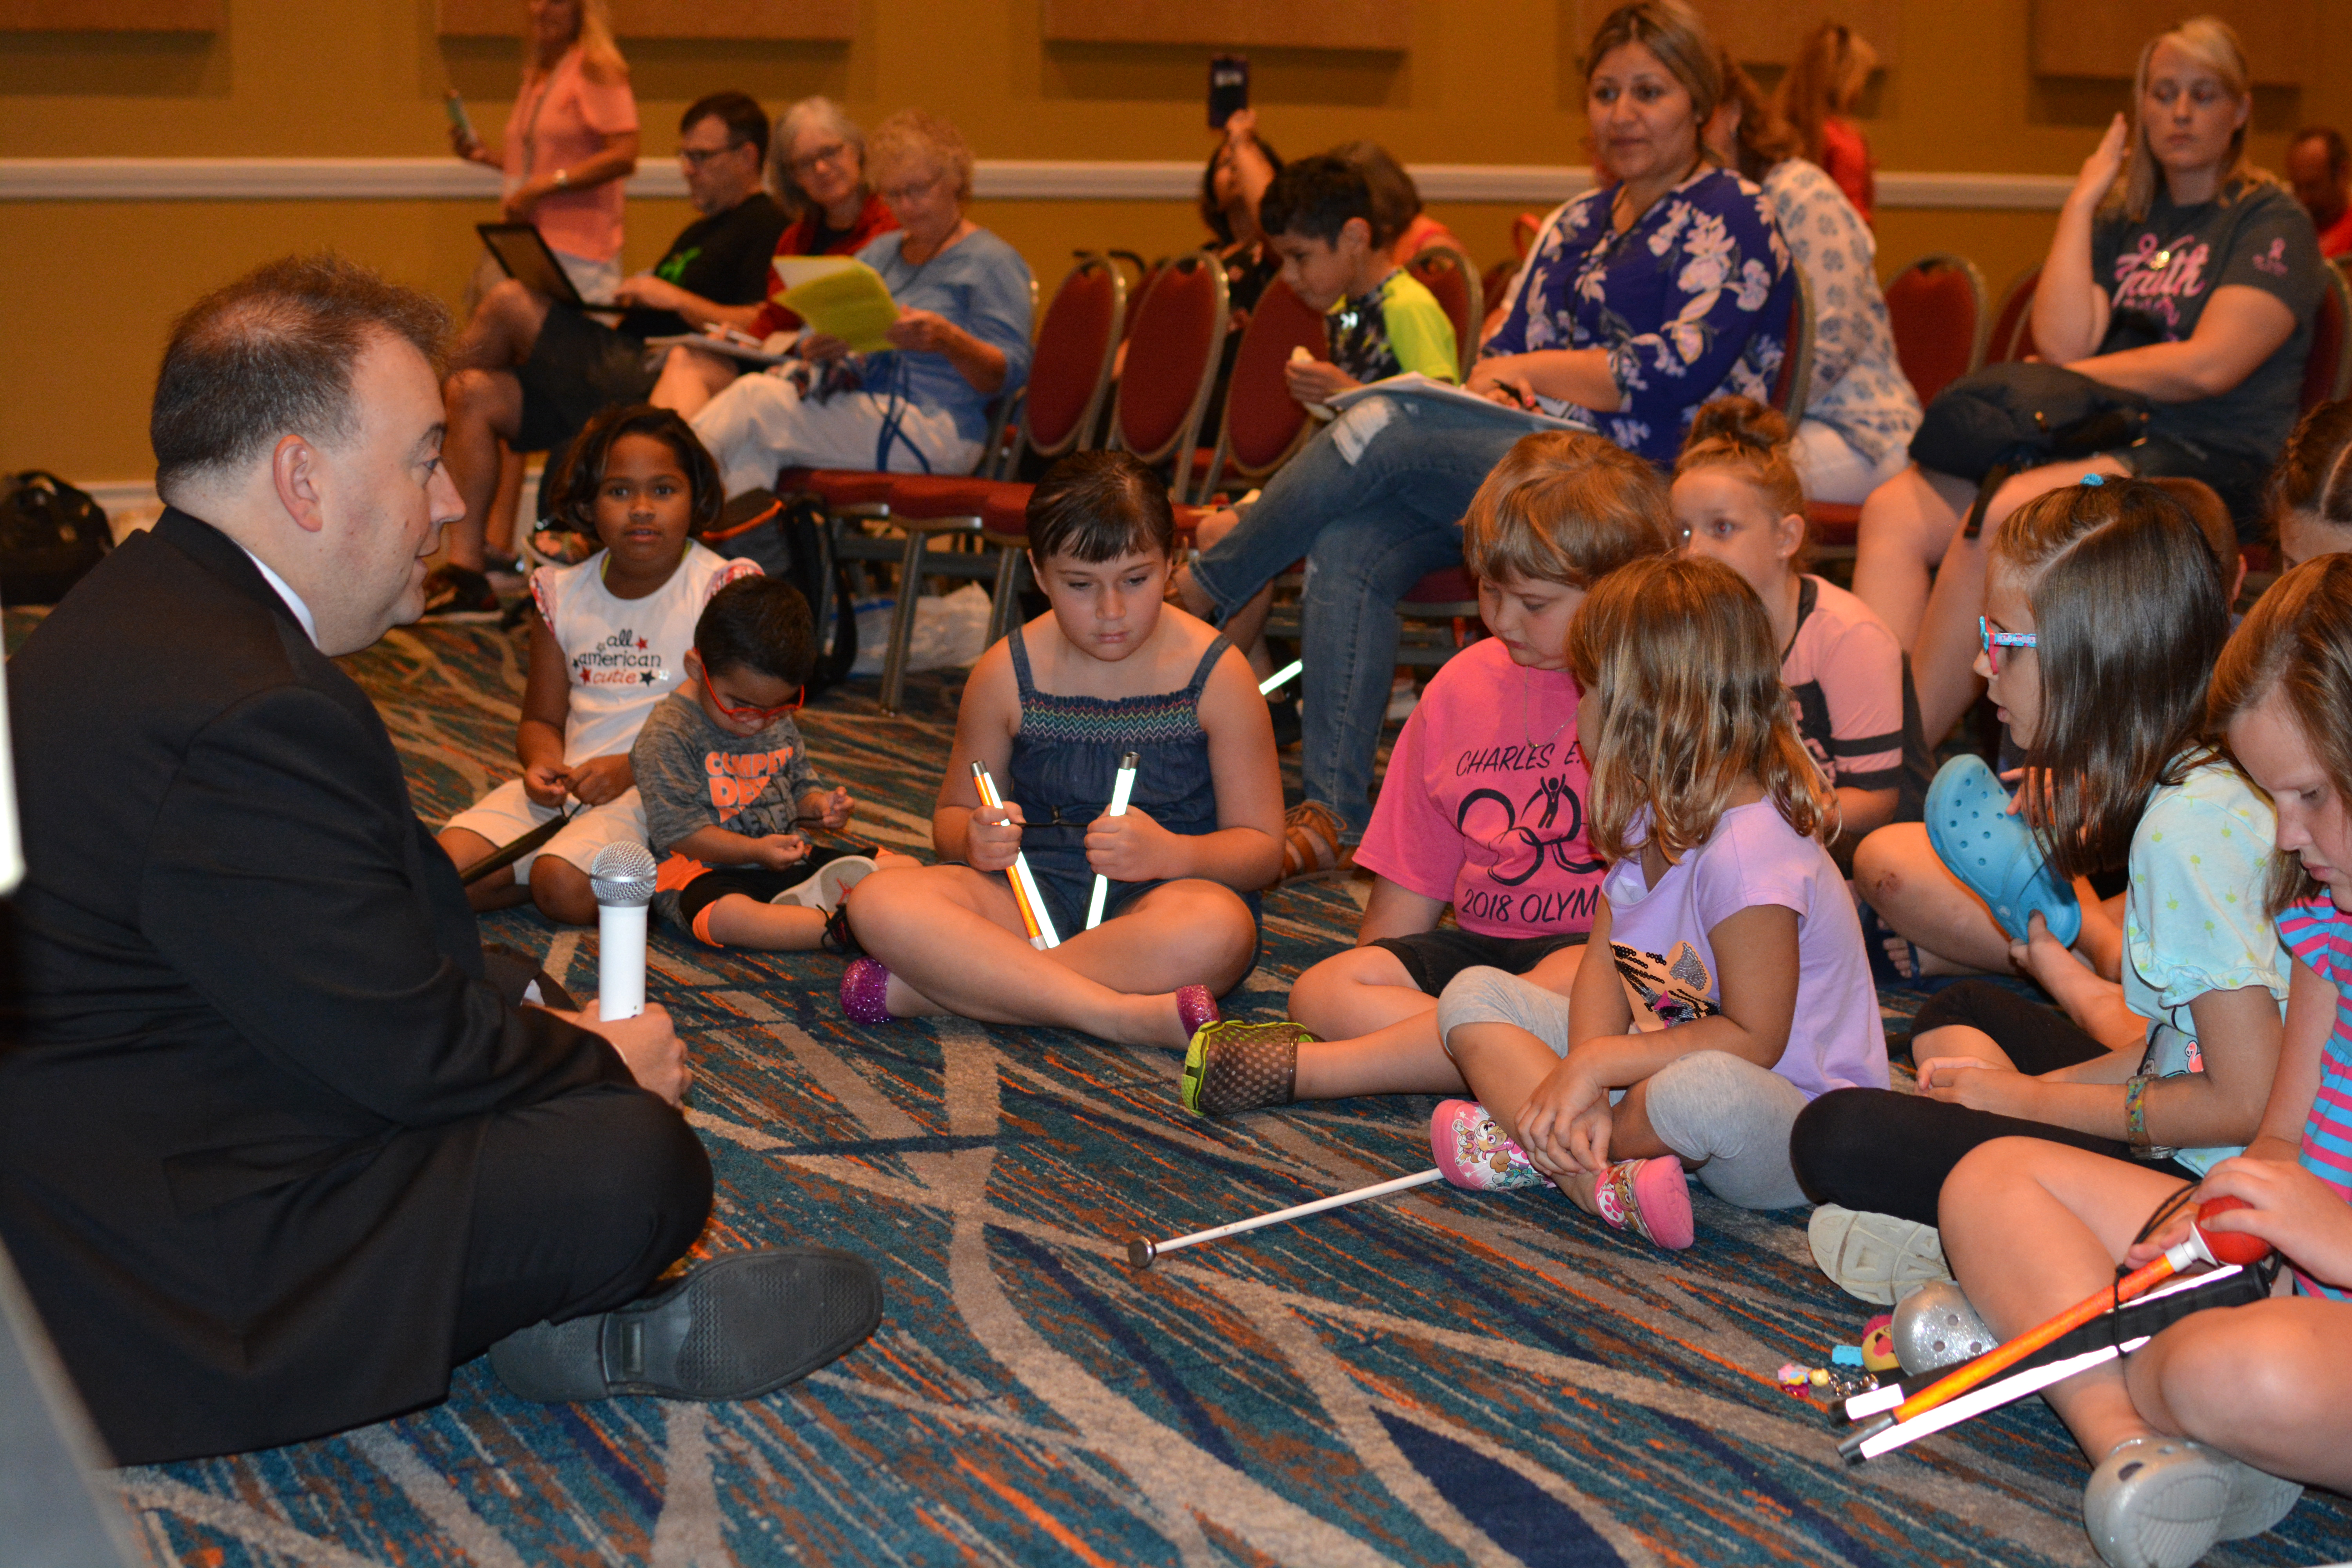 At the NOPBC Conference, NFB President Mark Riccobono sits on the floor surrounded by children.